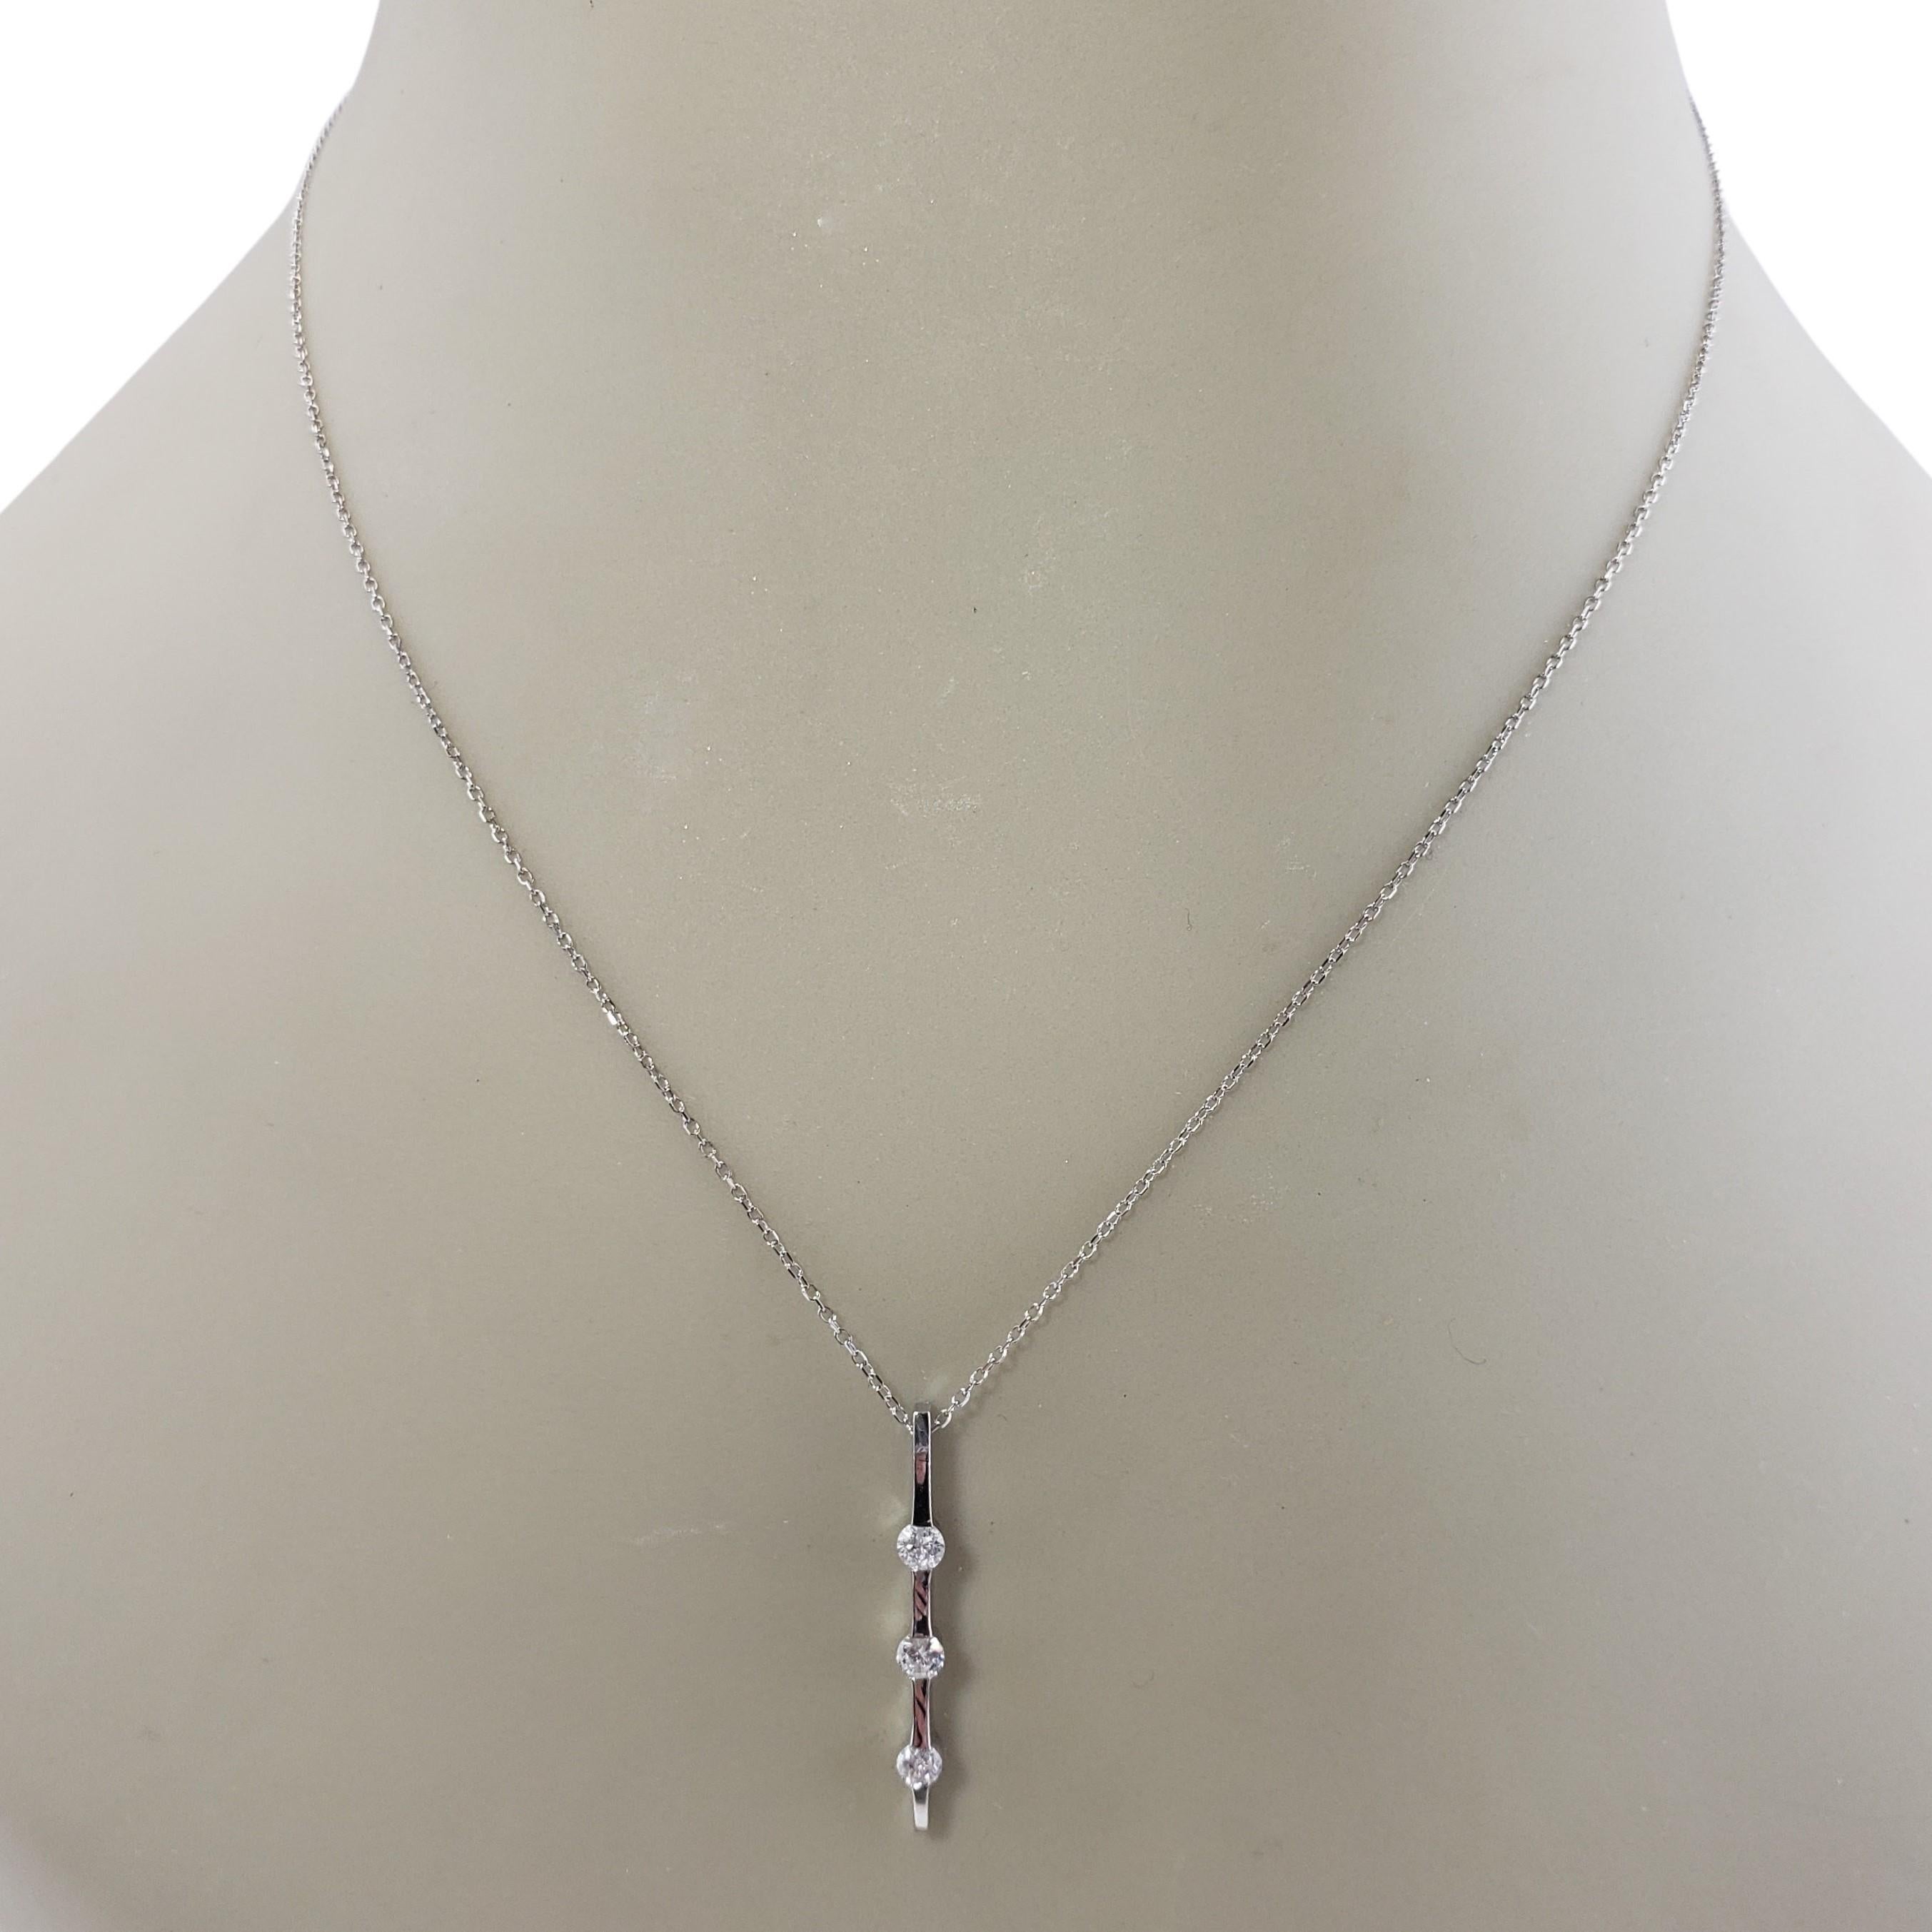 Vintage 14 Karat White Gold and Diamond Pendant Necklace-

This sparkling pendant features three round brilliant cut diamonds set in 14K white gold. Suspends from a classic cable chain.

Approximate total diamond weight: .21 ct.

Diamond clarity: